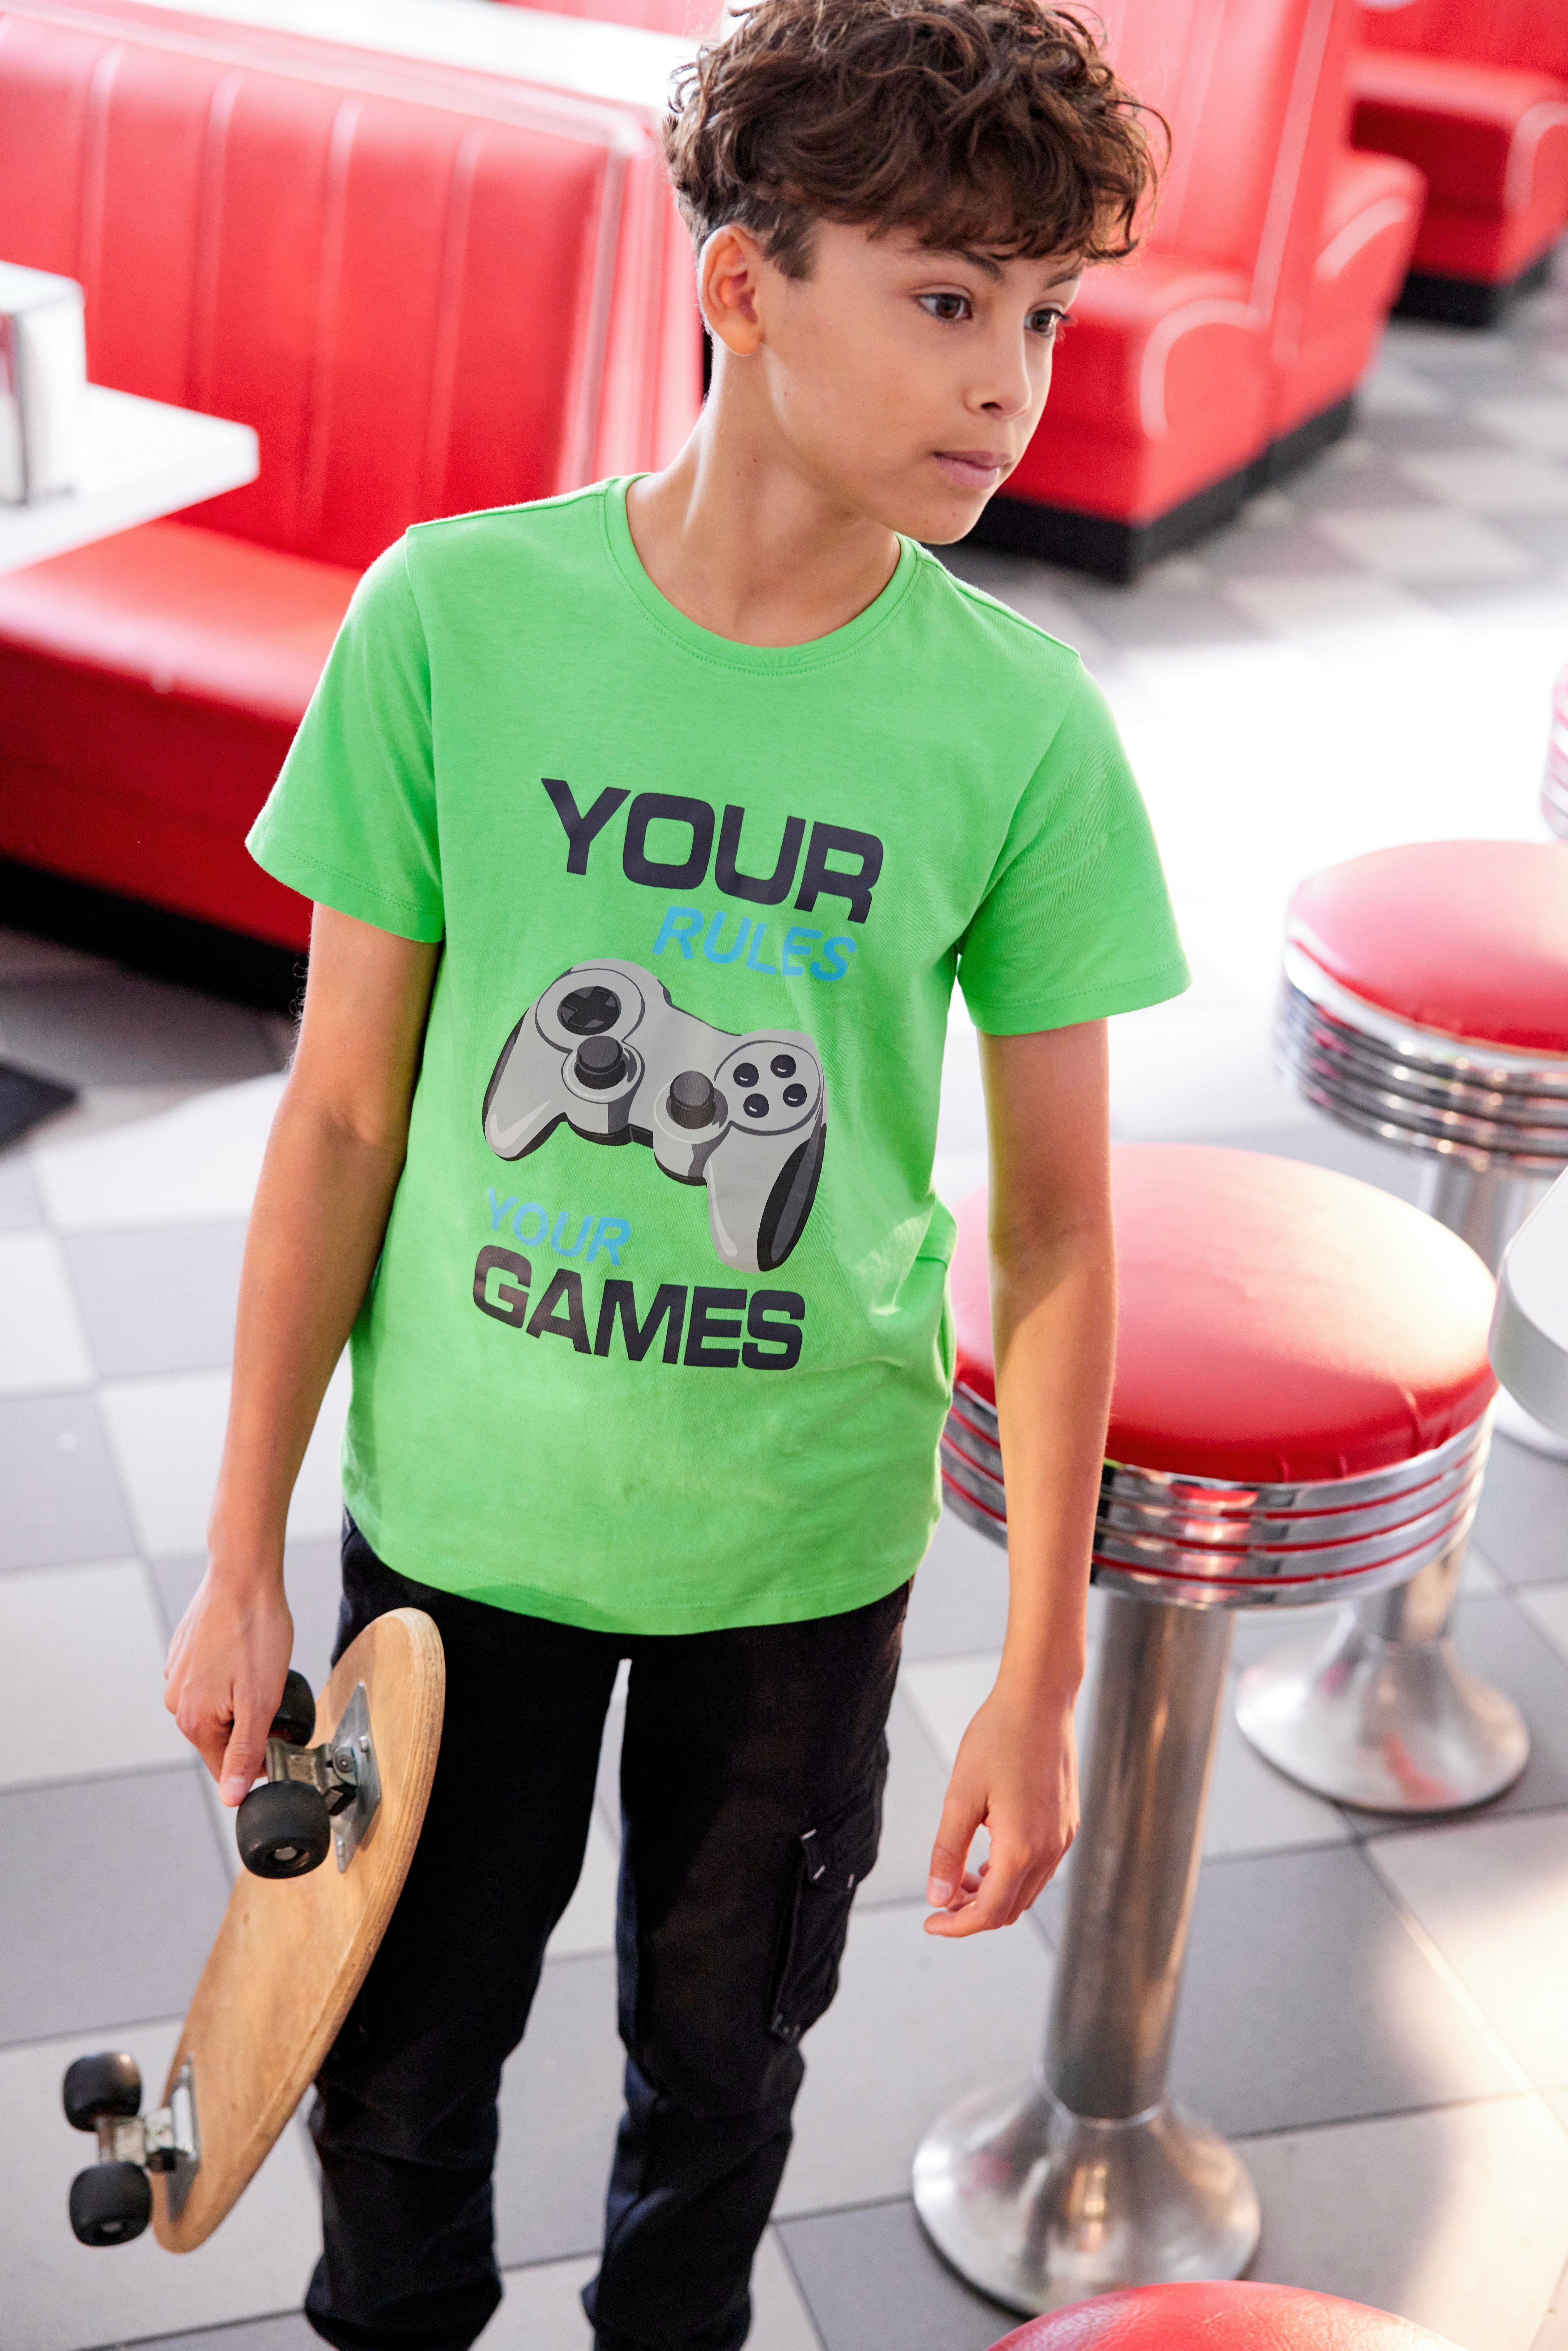 YOUR GAMES KIDSWORLD RULES T-Shirt YOUR